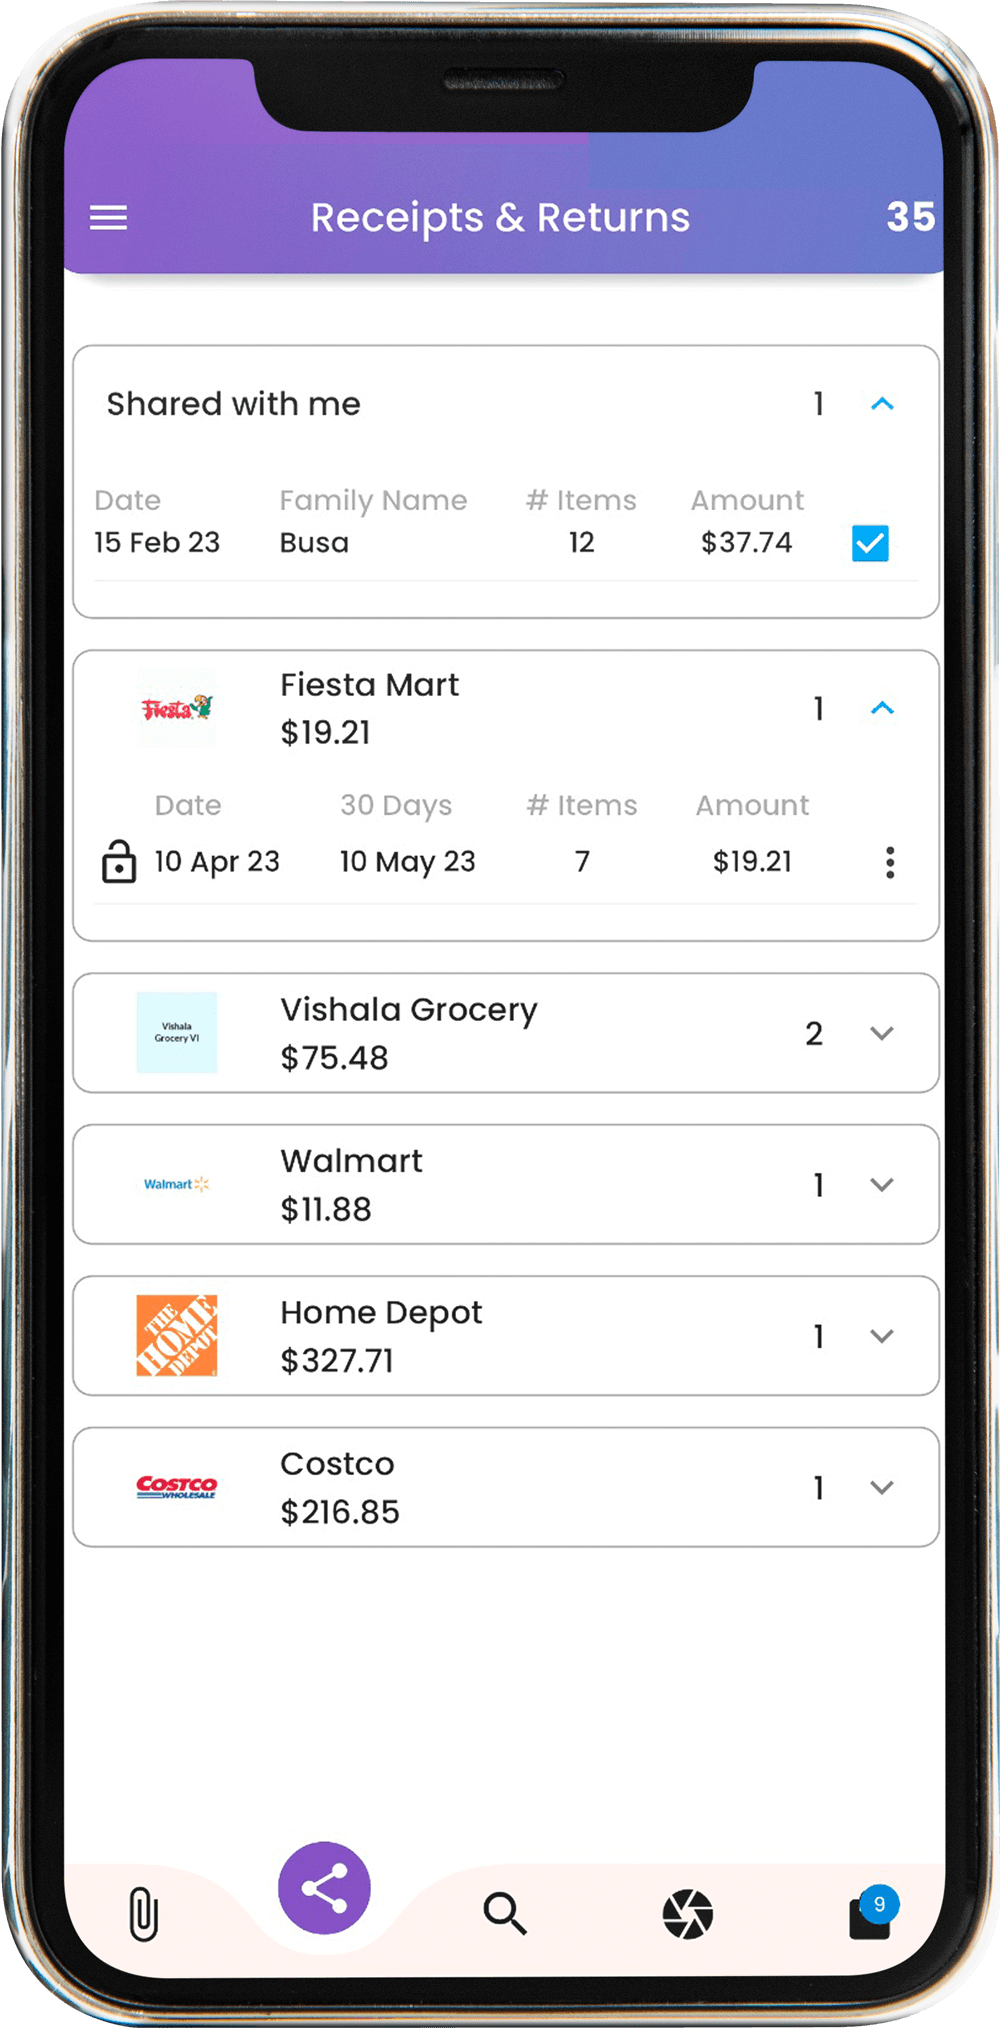 Receipts sorted by Store